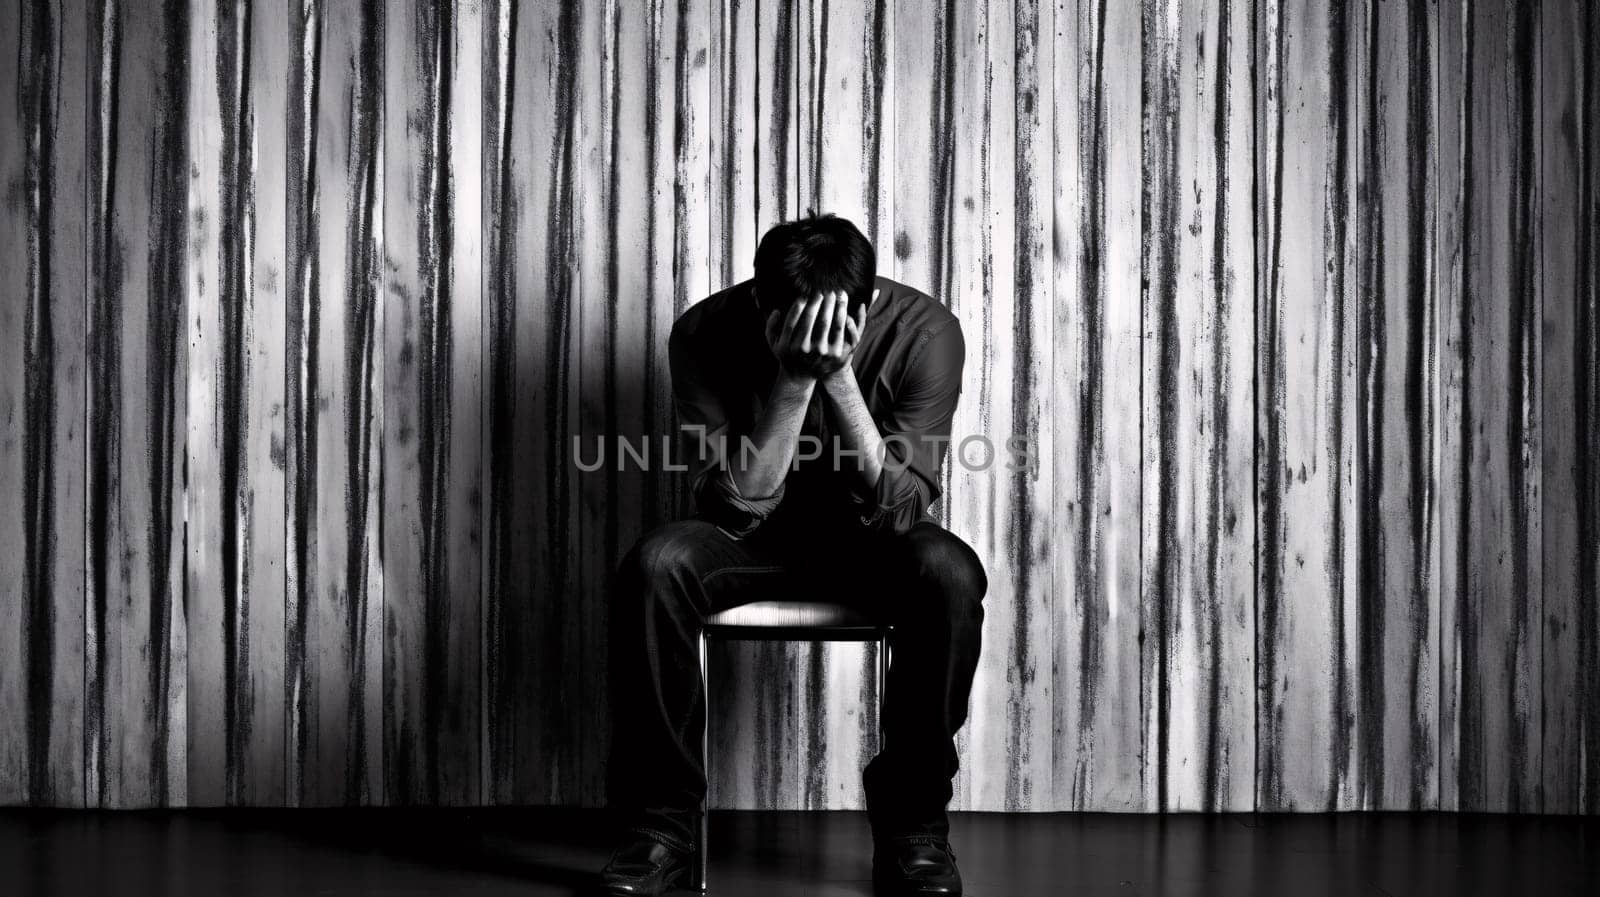 A lone man, cloaked in monochrome, sits in the shadows of an indoor room, his hands buried in his face, his footwear and clothing blending into the darkness, a portrait of despair and depression - burnout concept